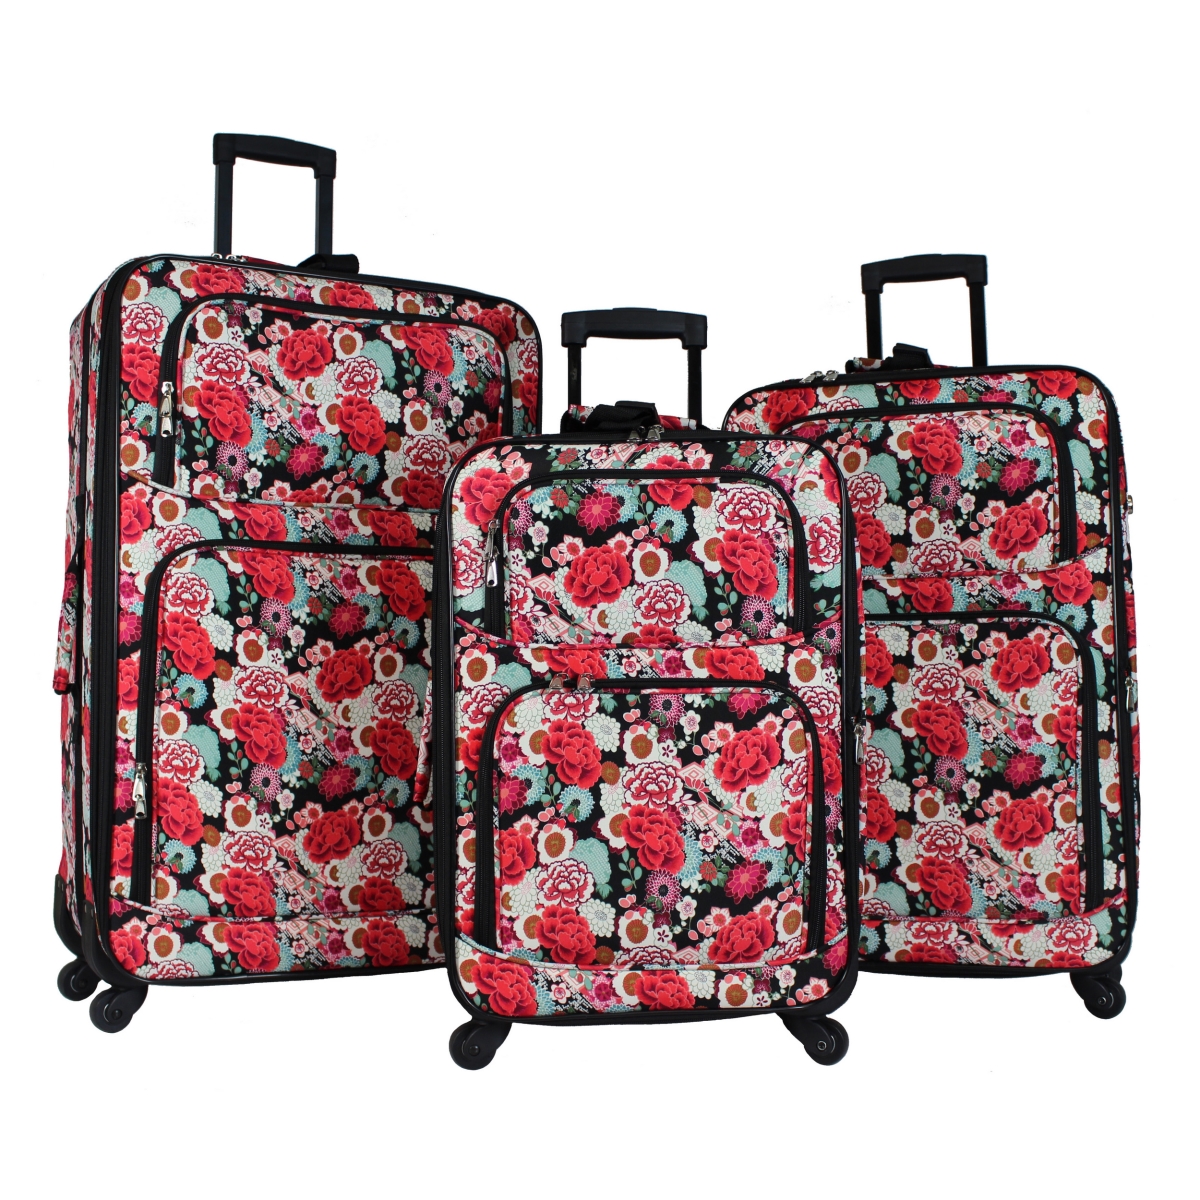 818703-193 Rolling Expandable Spinner Luggage Set - Flowers, 3 Piece